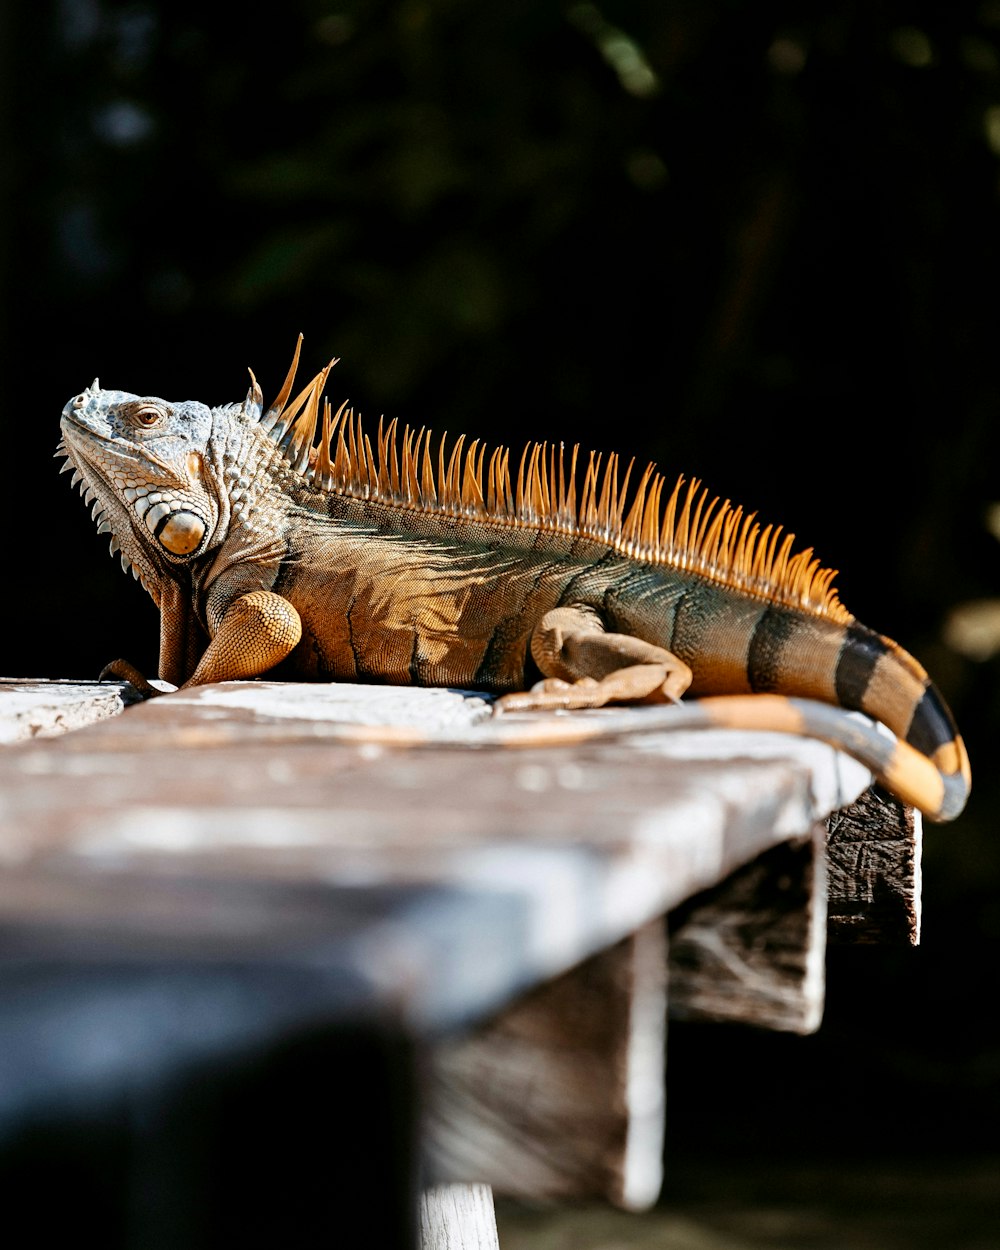 a large lizard sitting on top of a wooden table